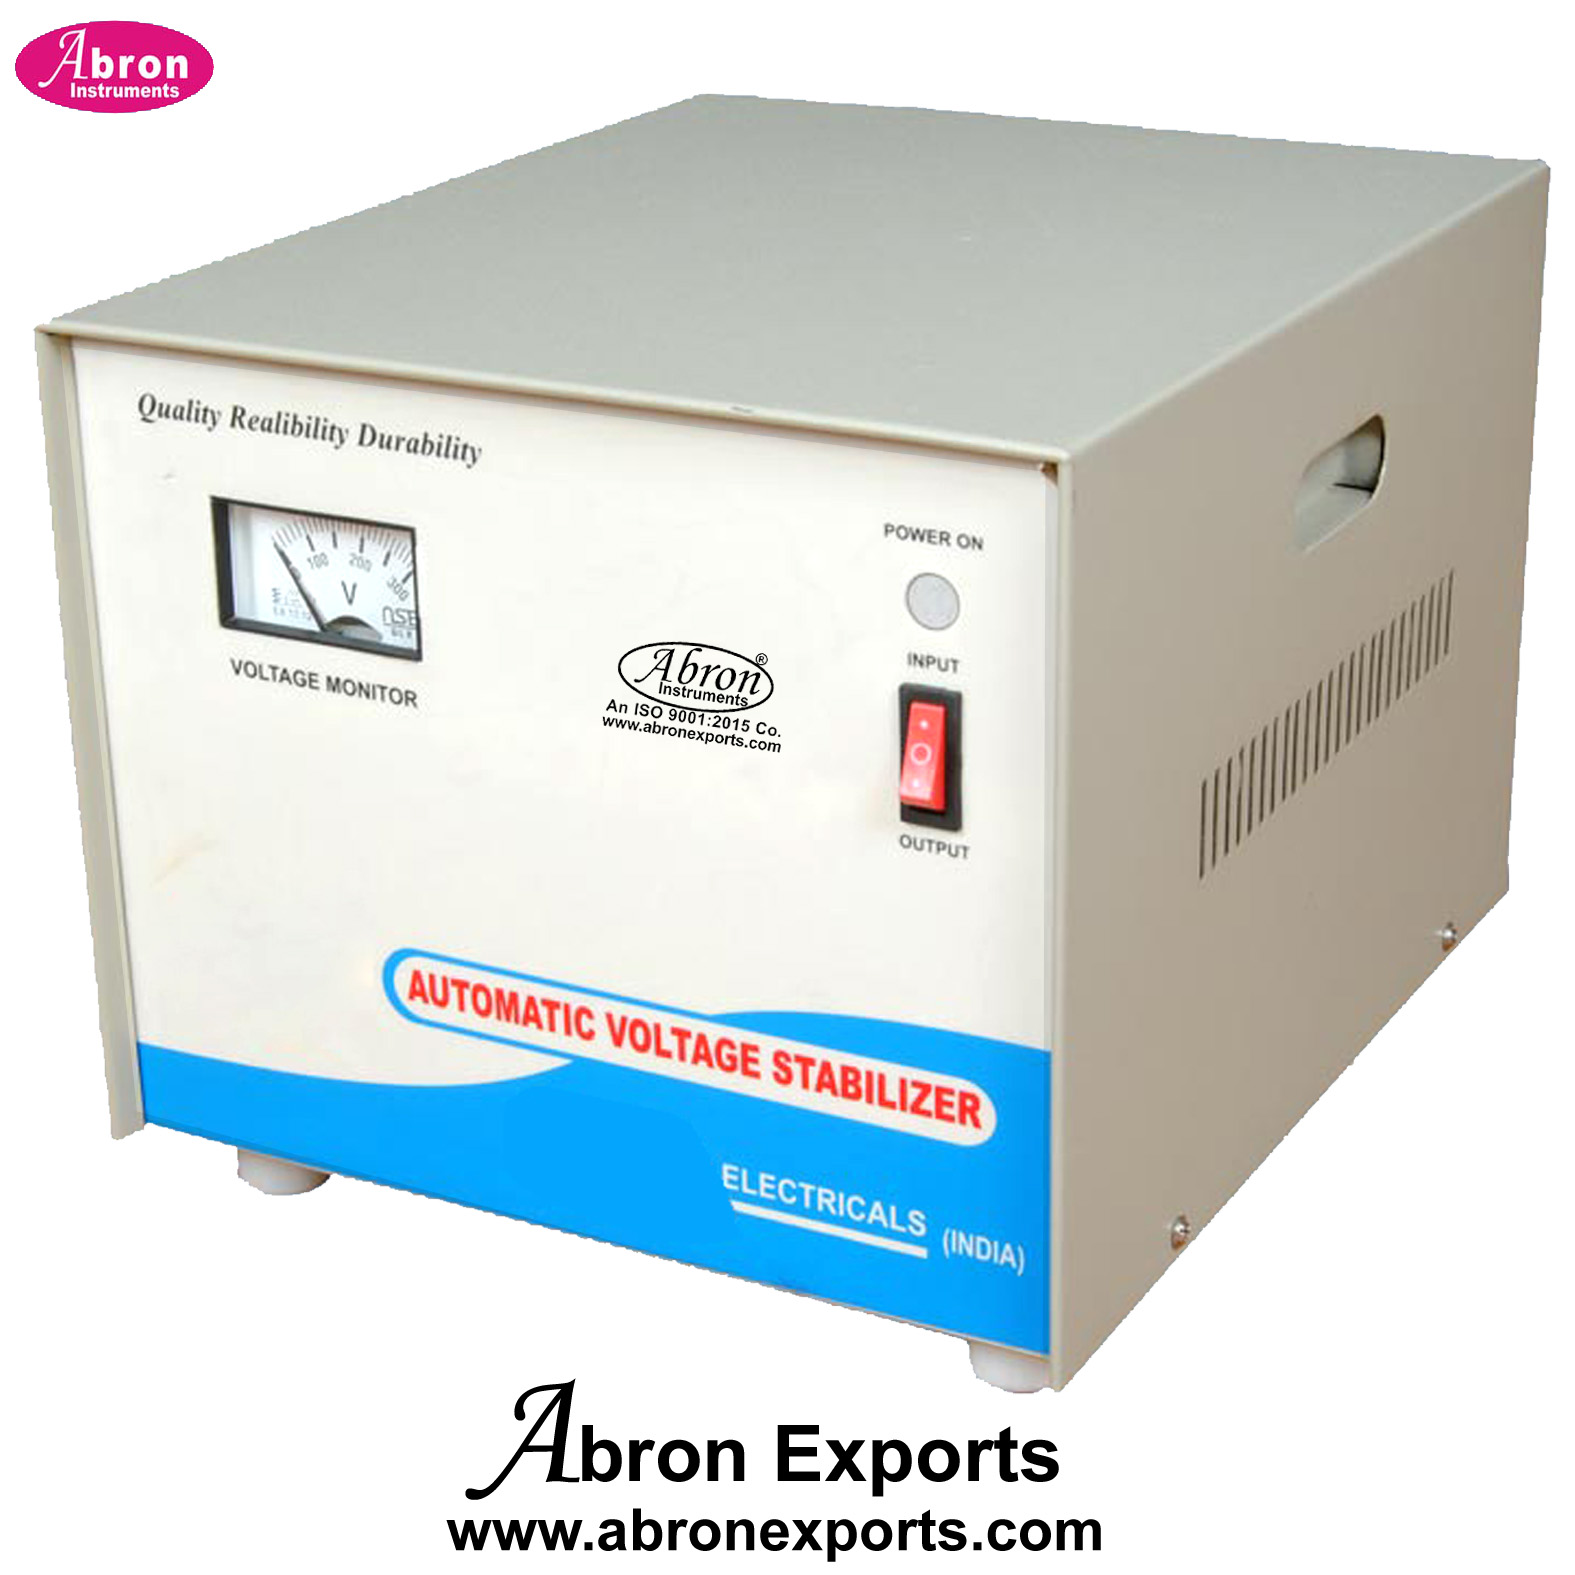 Voltage Stabilizer Automatic with Dial 1.5Ton Input 170-250v AC output 220V +10% solid state with connector AE-1396A3